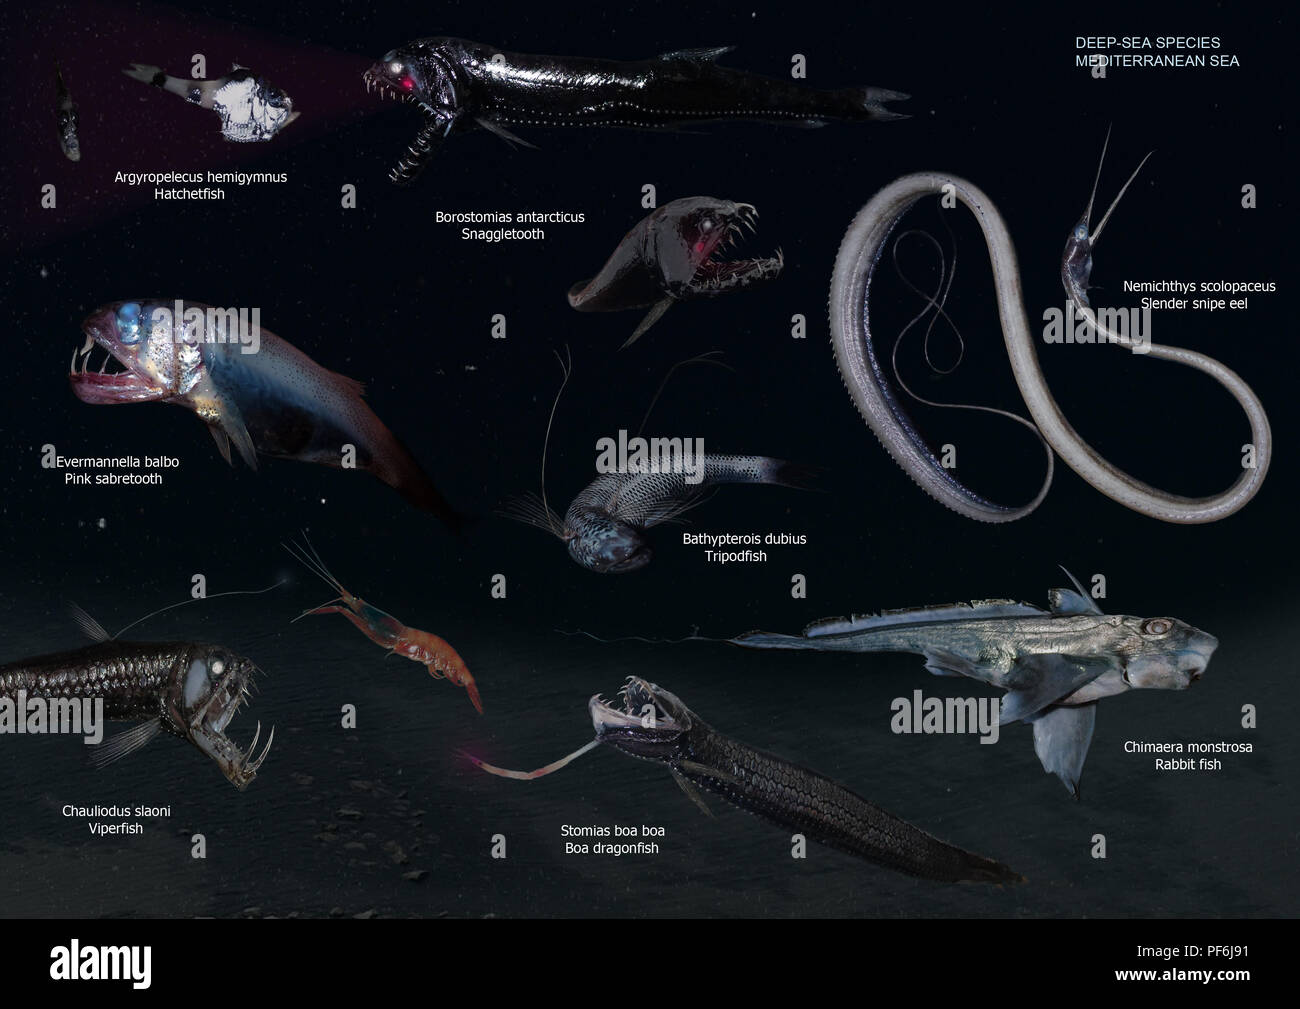 Composition of images of strange abyssal fish. Deepsea real monsters of the Mediterranean Sea. Species that live in depths where no sunlight reaches Stock Photo